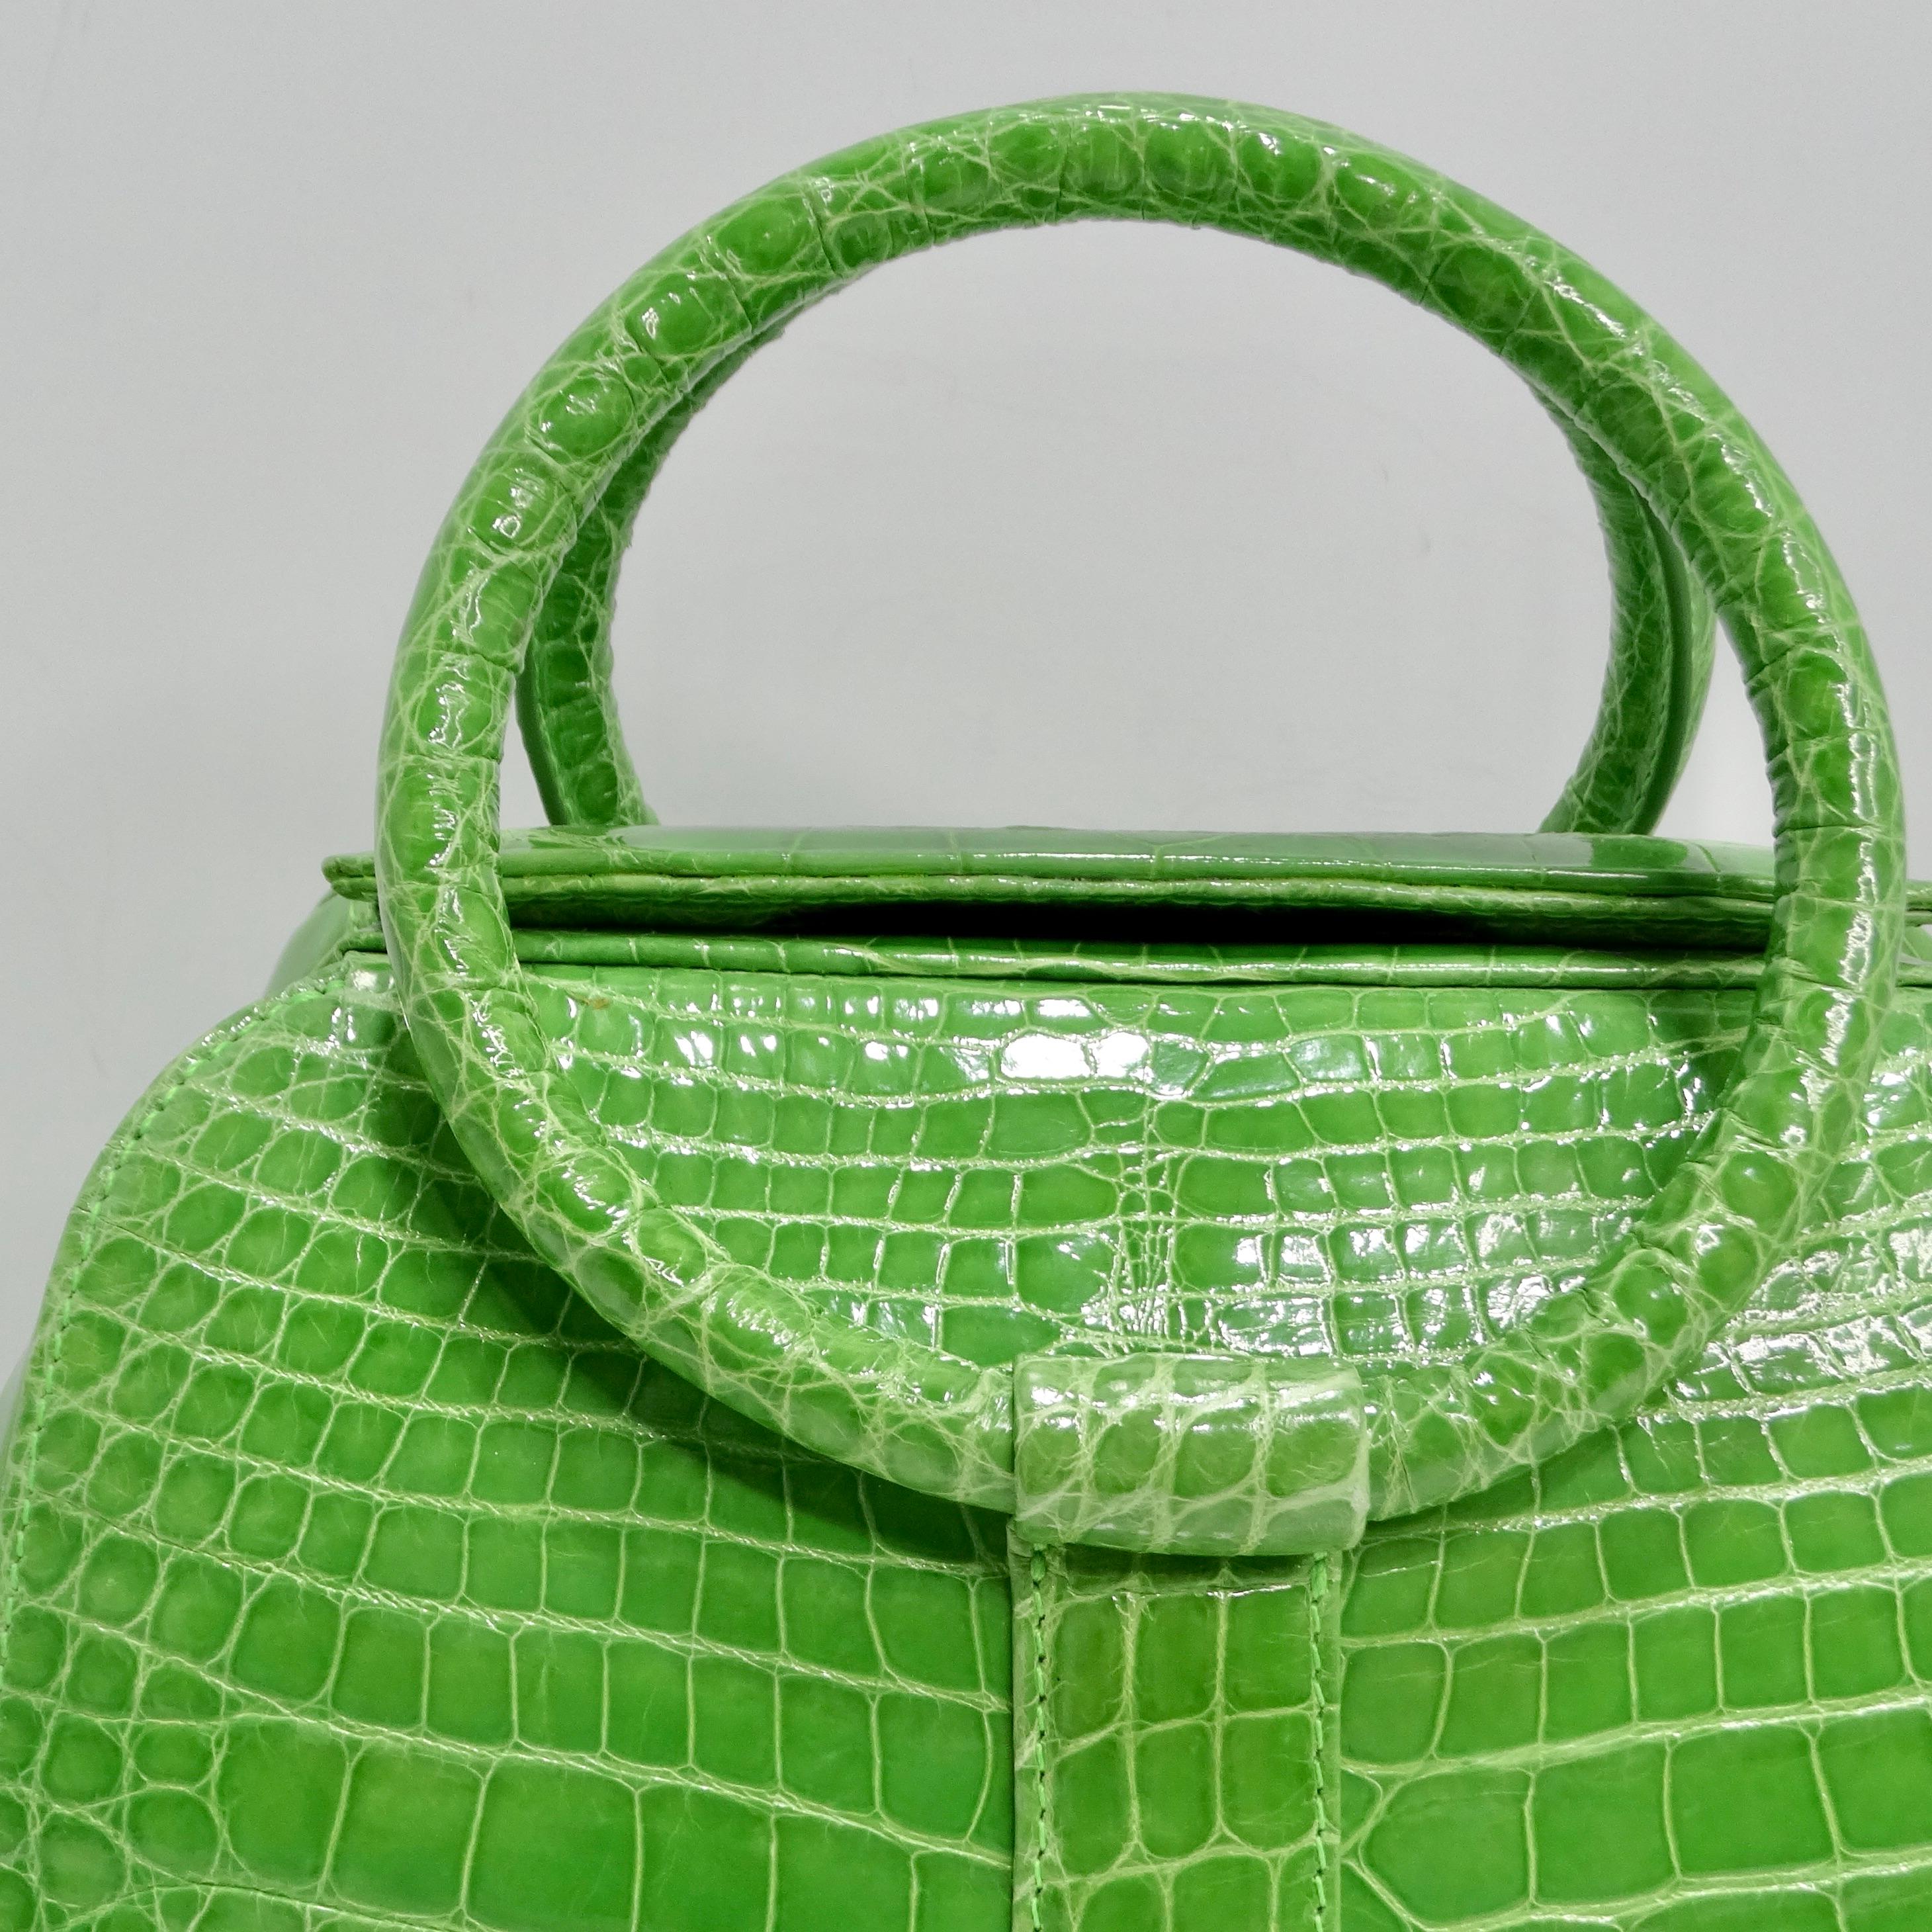 The BC Luxury Green Crocodile Leather Top Handle Bag is a truly exquisite accessory that exudes luxury and sophistication. Crafted from vibrant lime green crocodile leather, this structured top handle bag is sure to make a statement wherever you